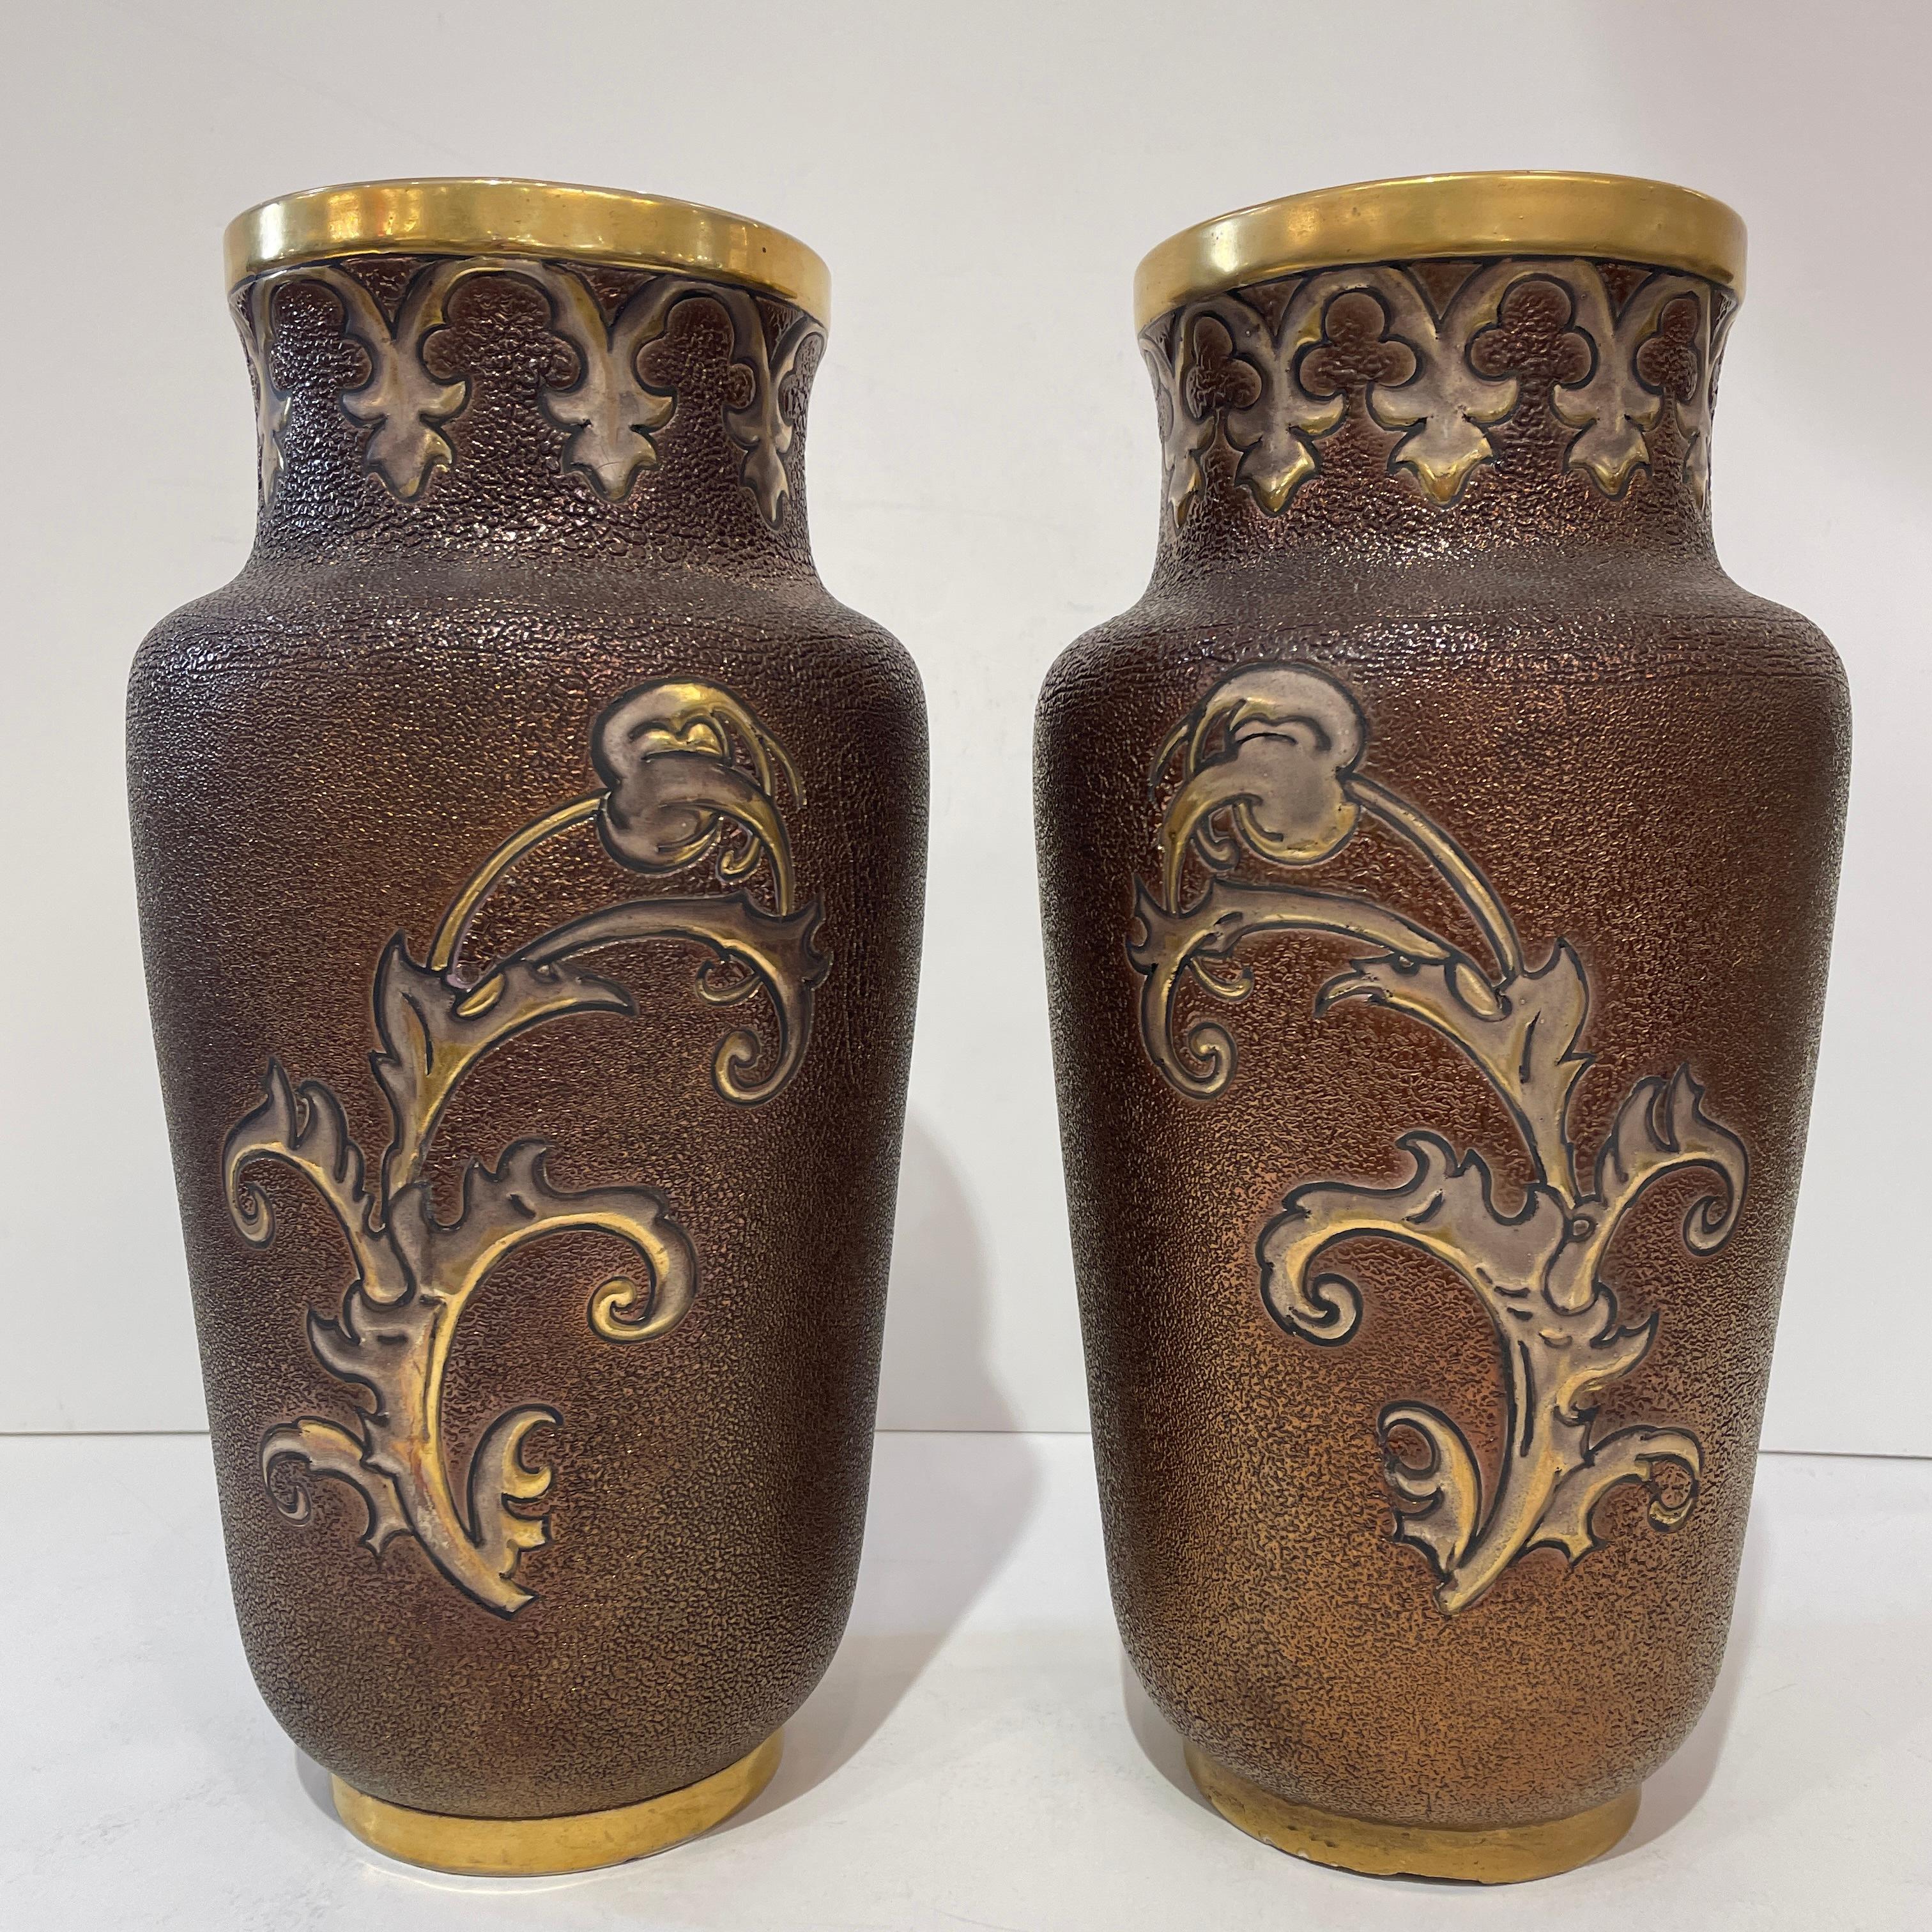 Neoclassical Revival 1880 Gien French Faience Pair Majolica Gold Chocolate Vases with Armored Knights For Sale